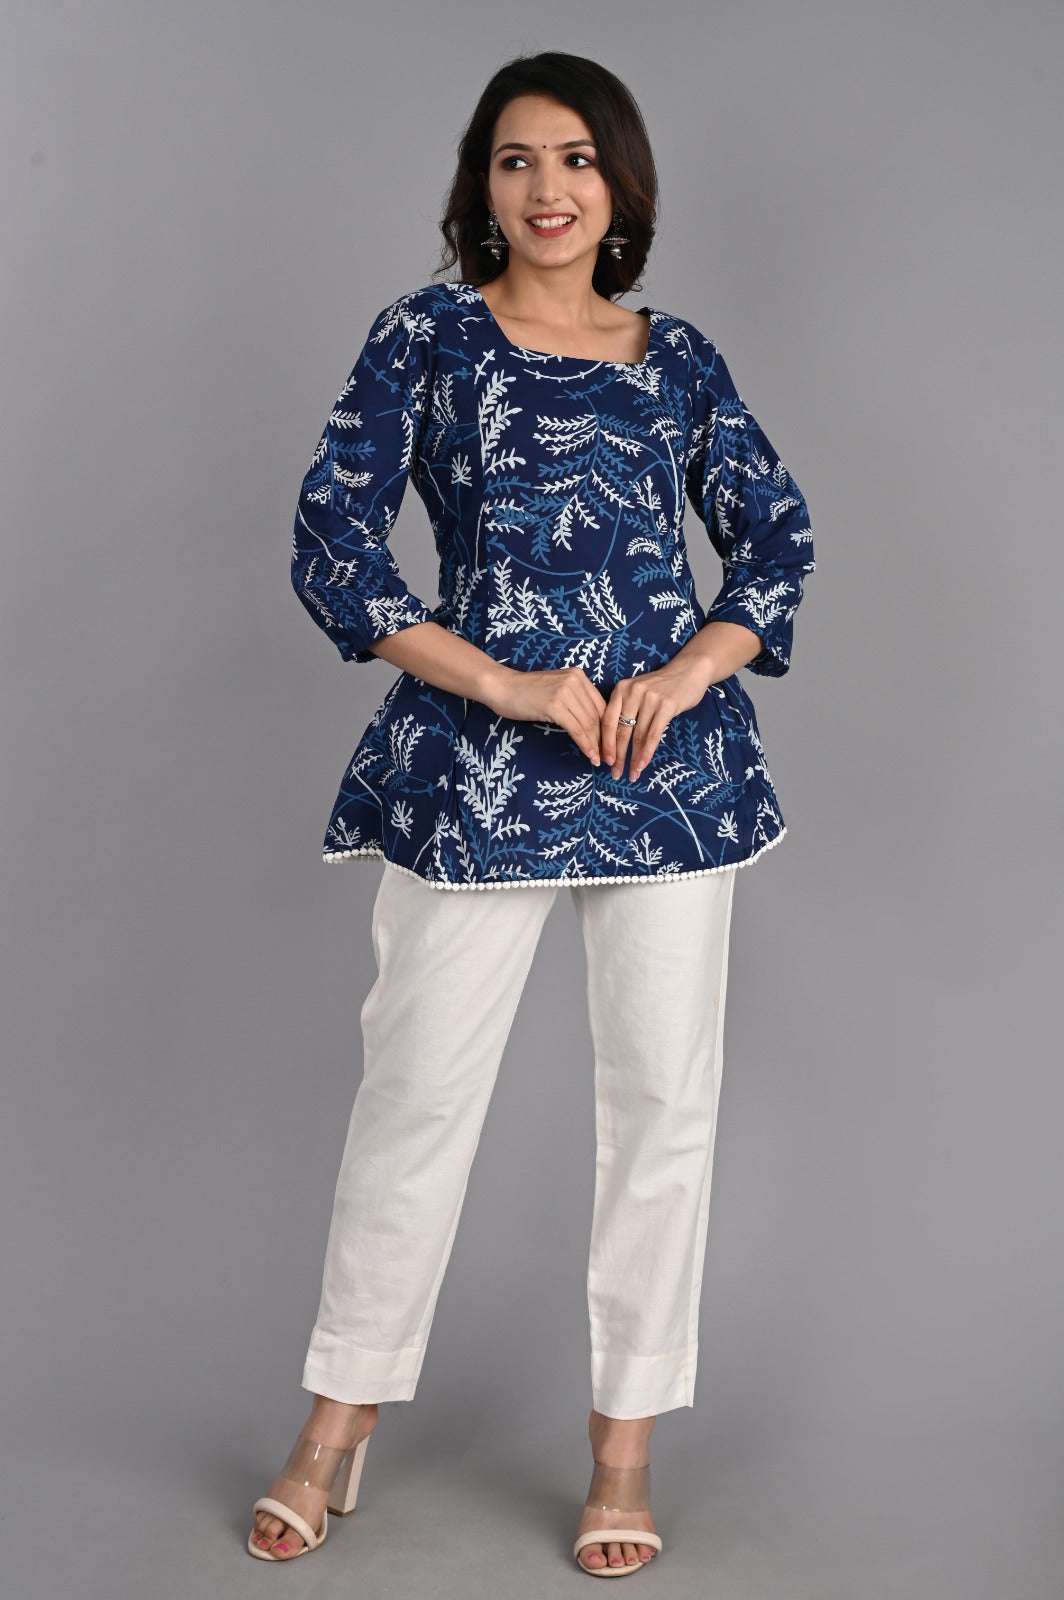 Floral Navy Square Neck Top